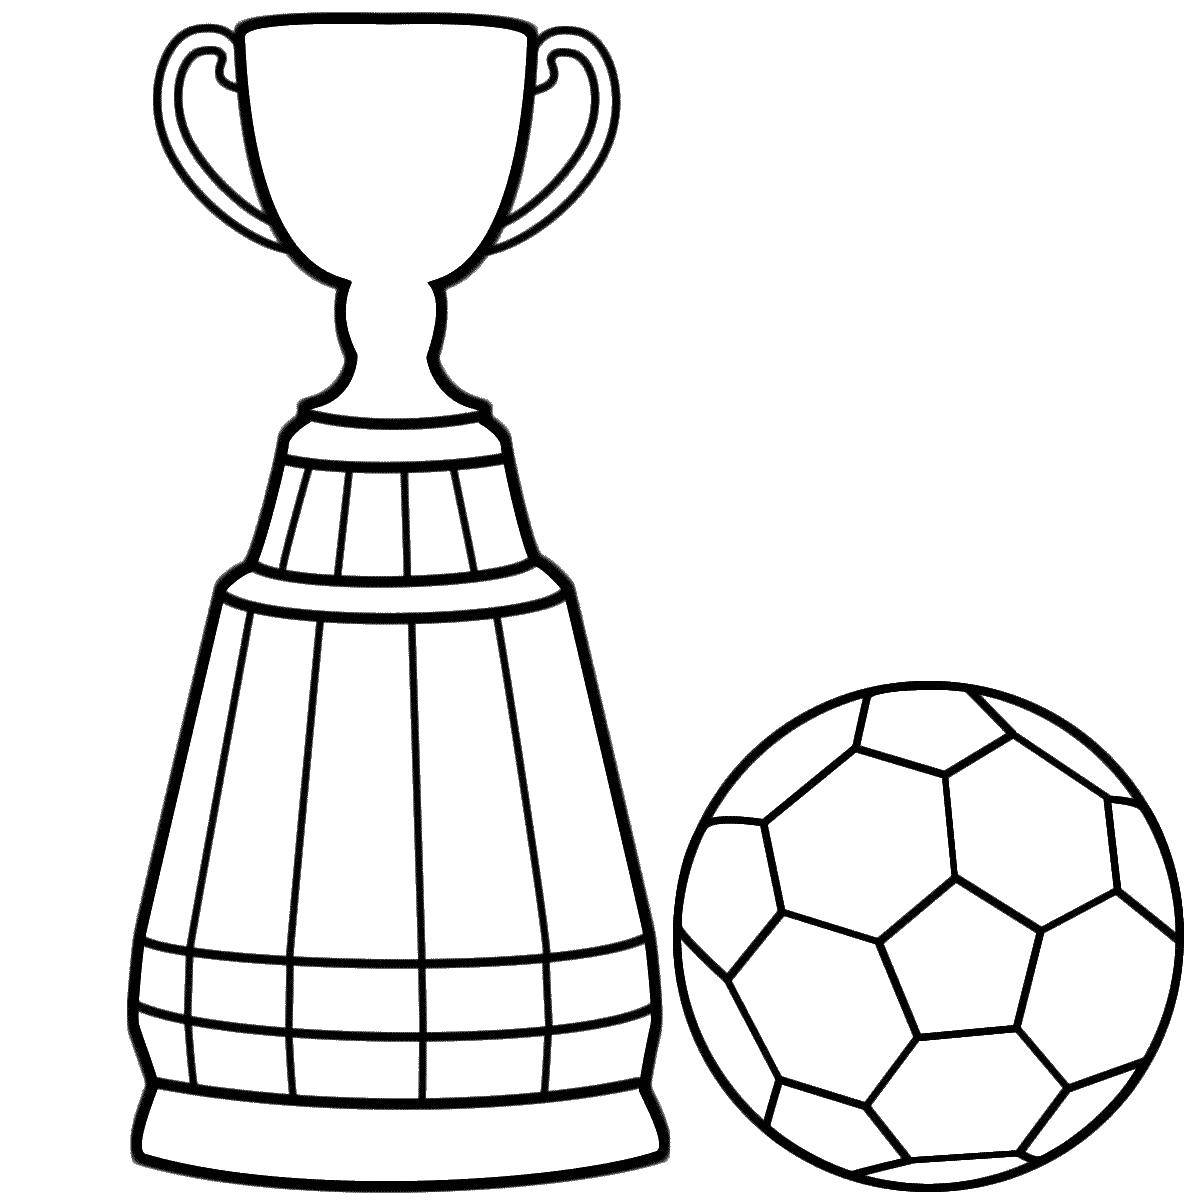 Coloring Cup football. Category Football. Tags:  Cup, football.